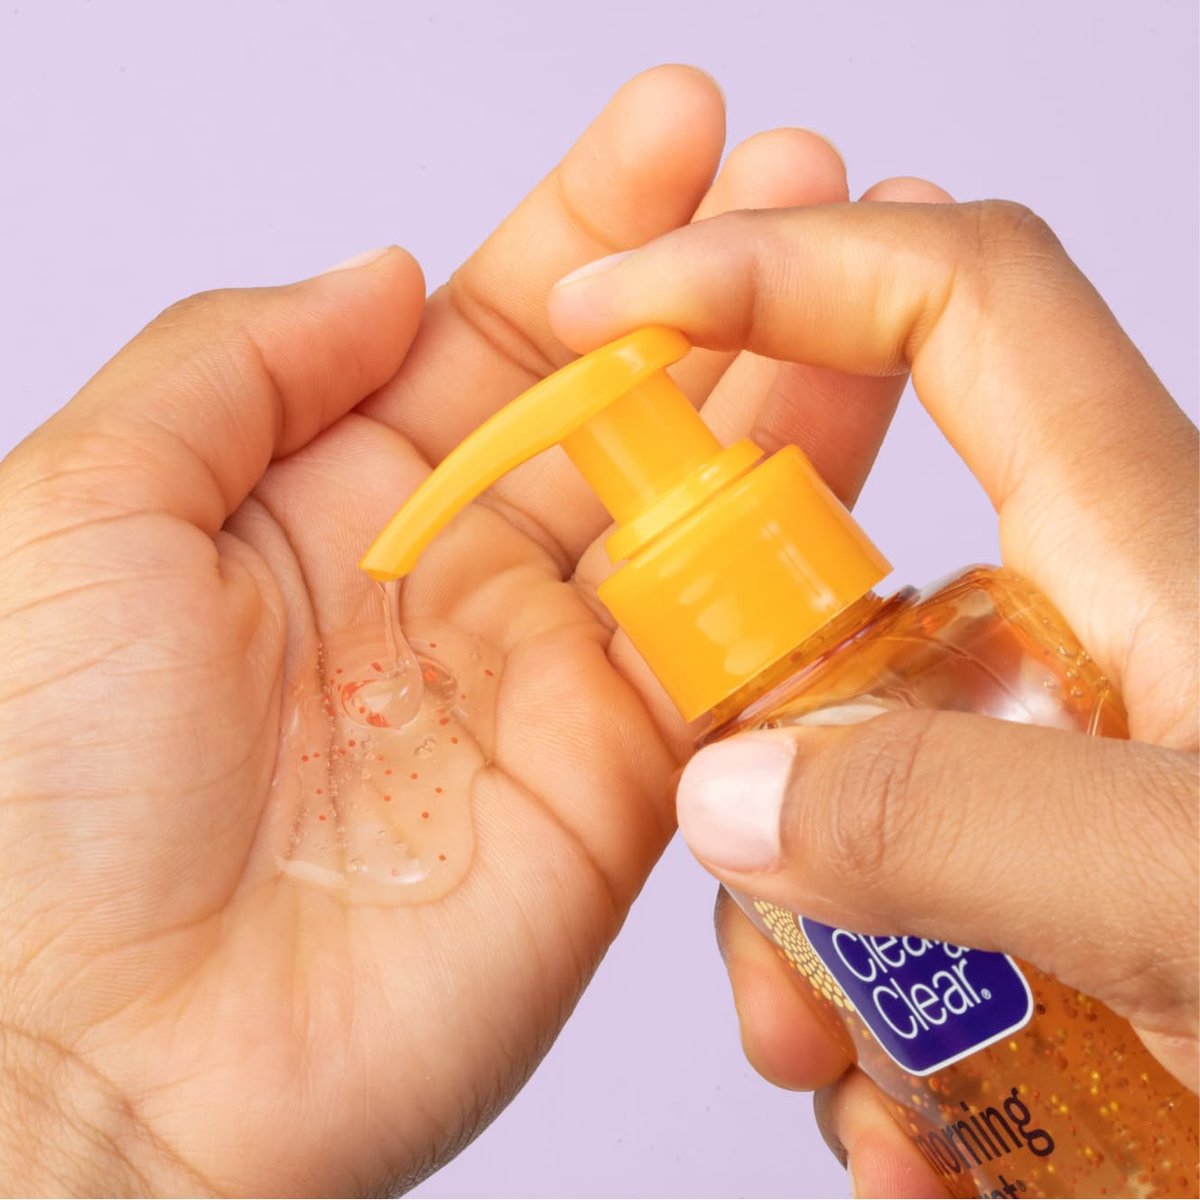 Orange Clean & Clear Morning Burst cleanser being pumped into palm of hand in front of purple background